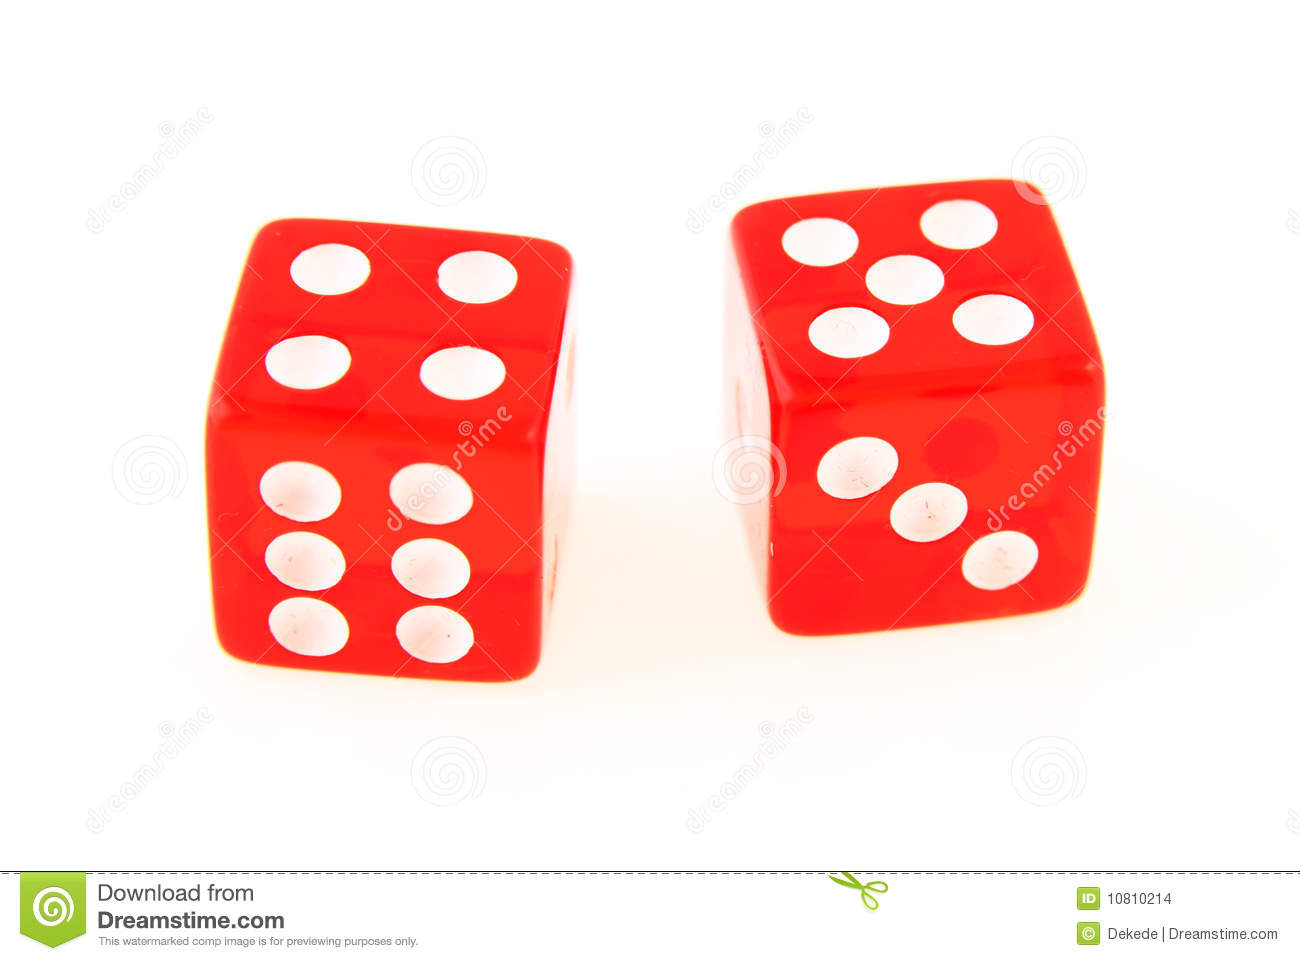 Stock Images  2 Dice Close Up   Showing The Numbers 4 And 5  Image    